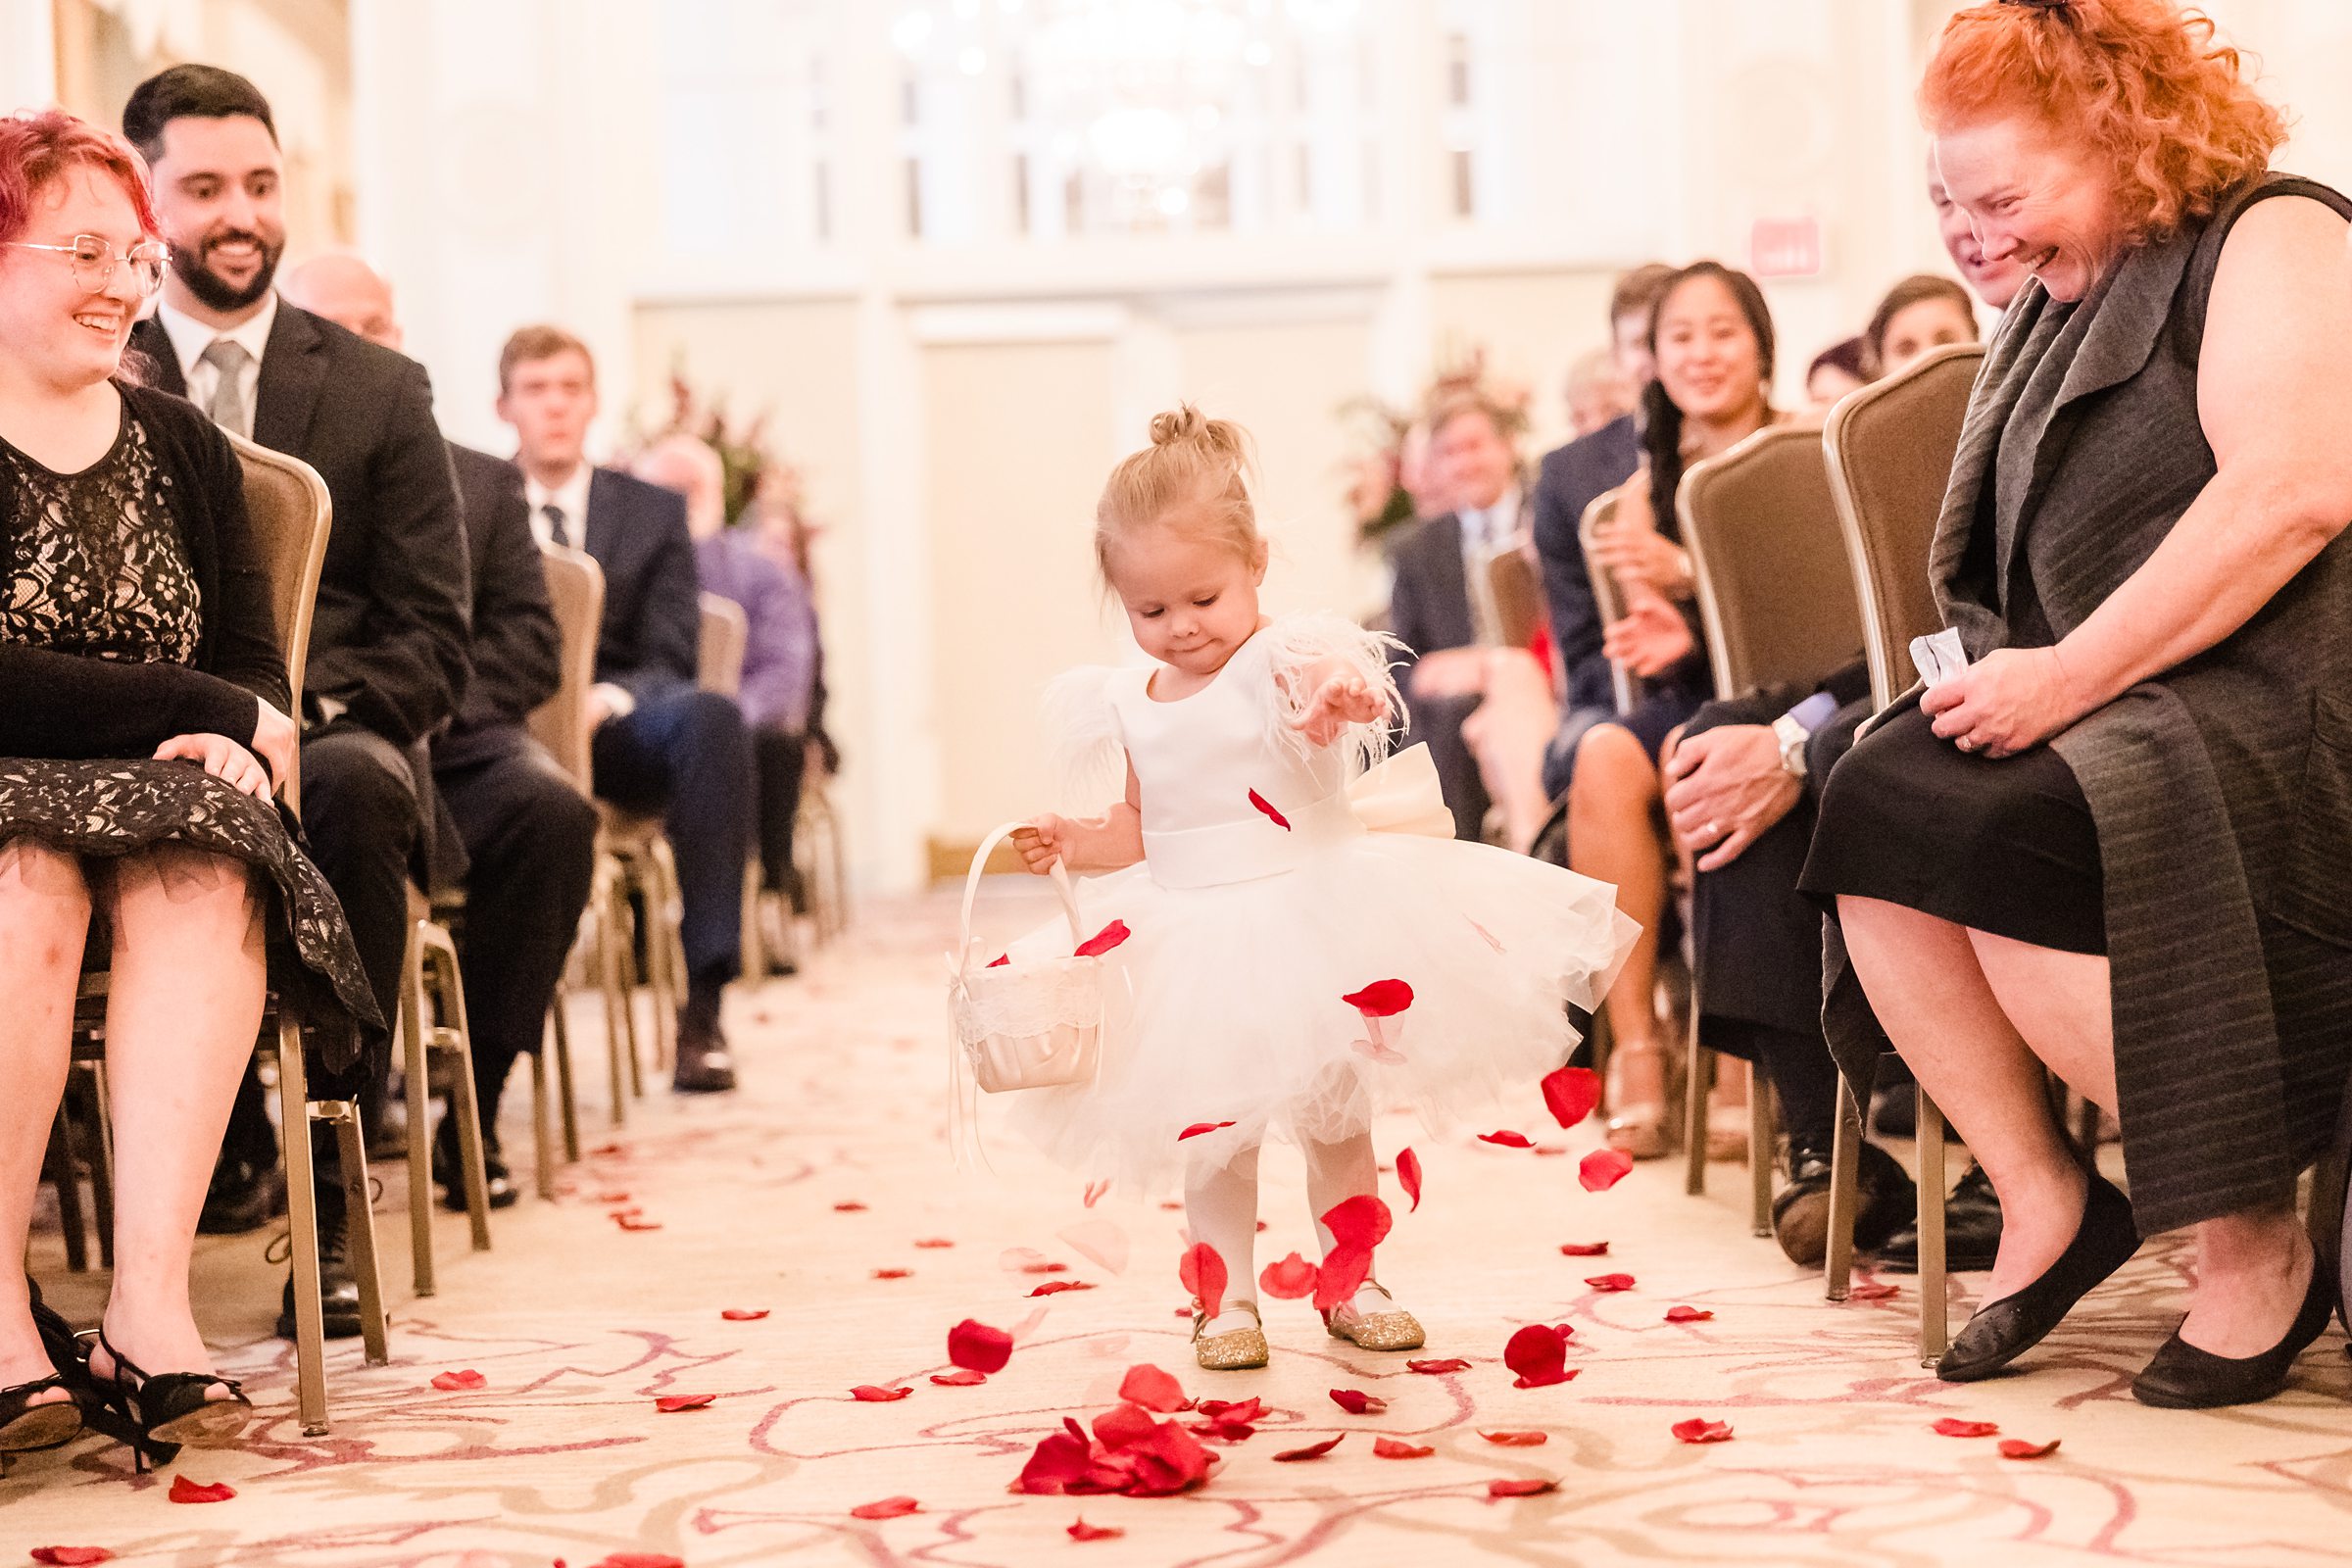 Flowergirl drops flower peddles during a wedding ceremony at the Hotel Pere Marquette in Peoria, Illinois.